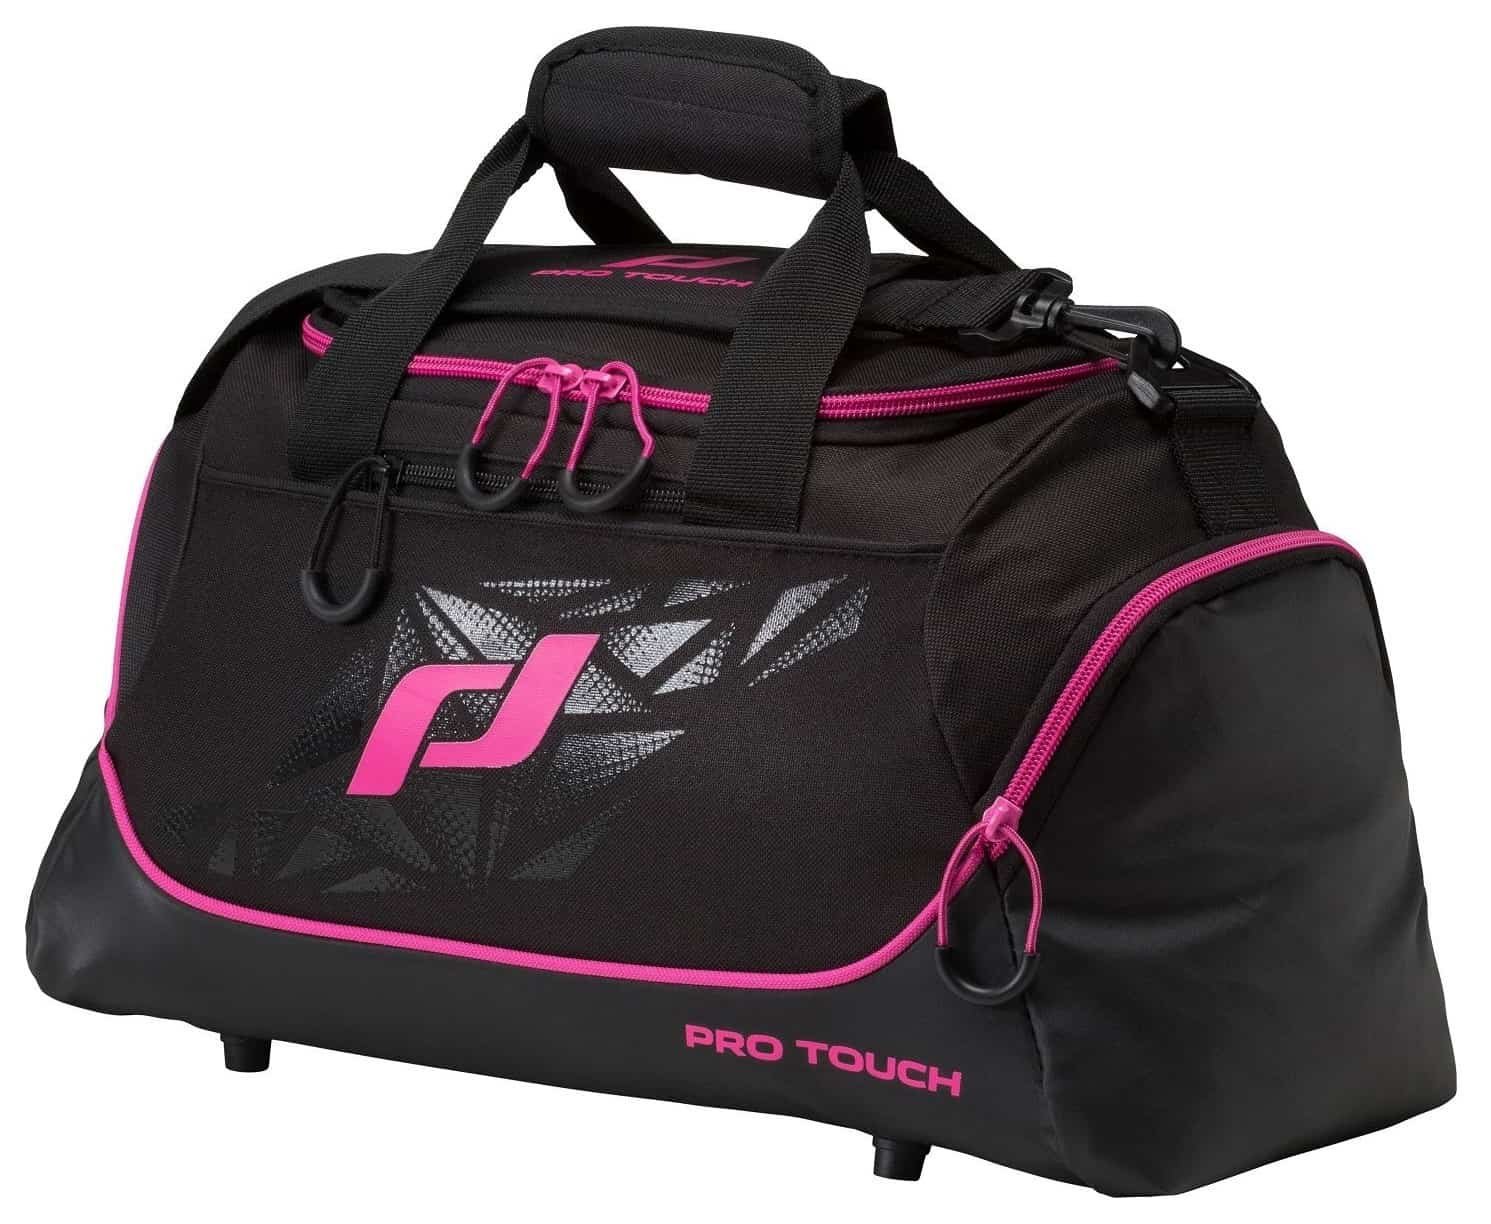 Pro Touch Force Bag